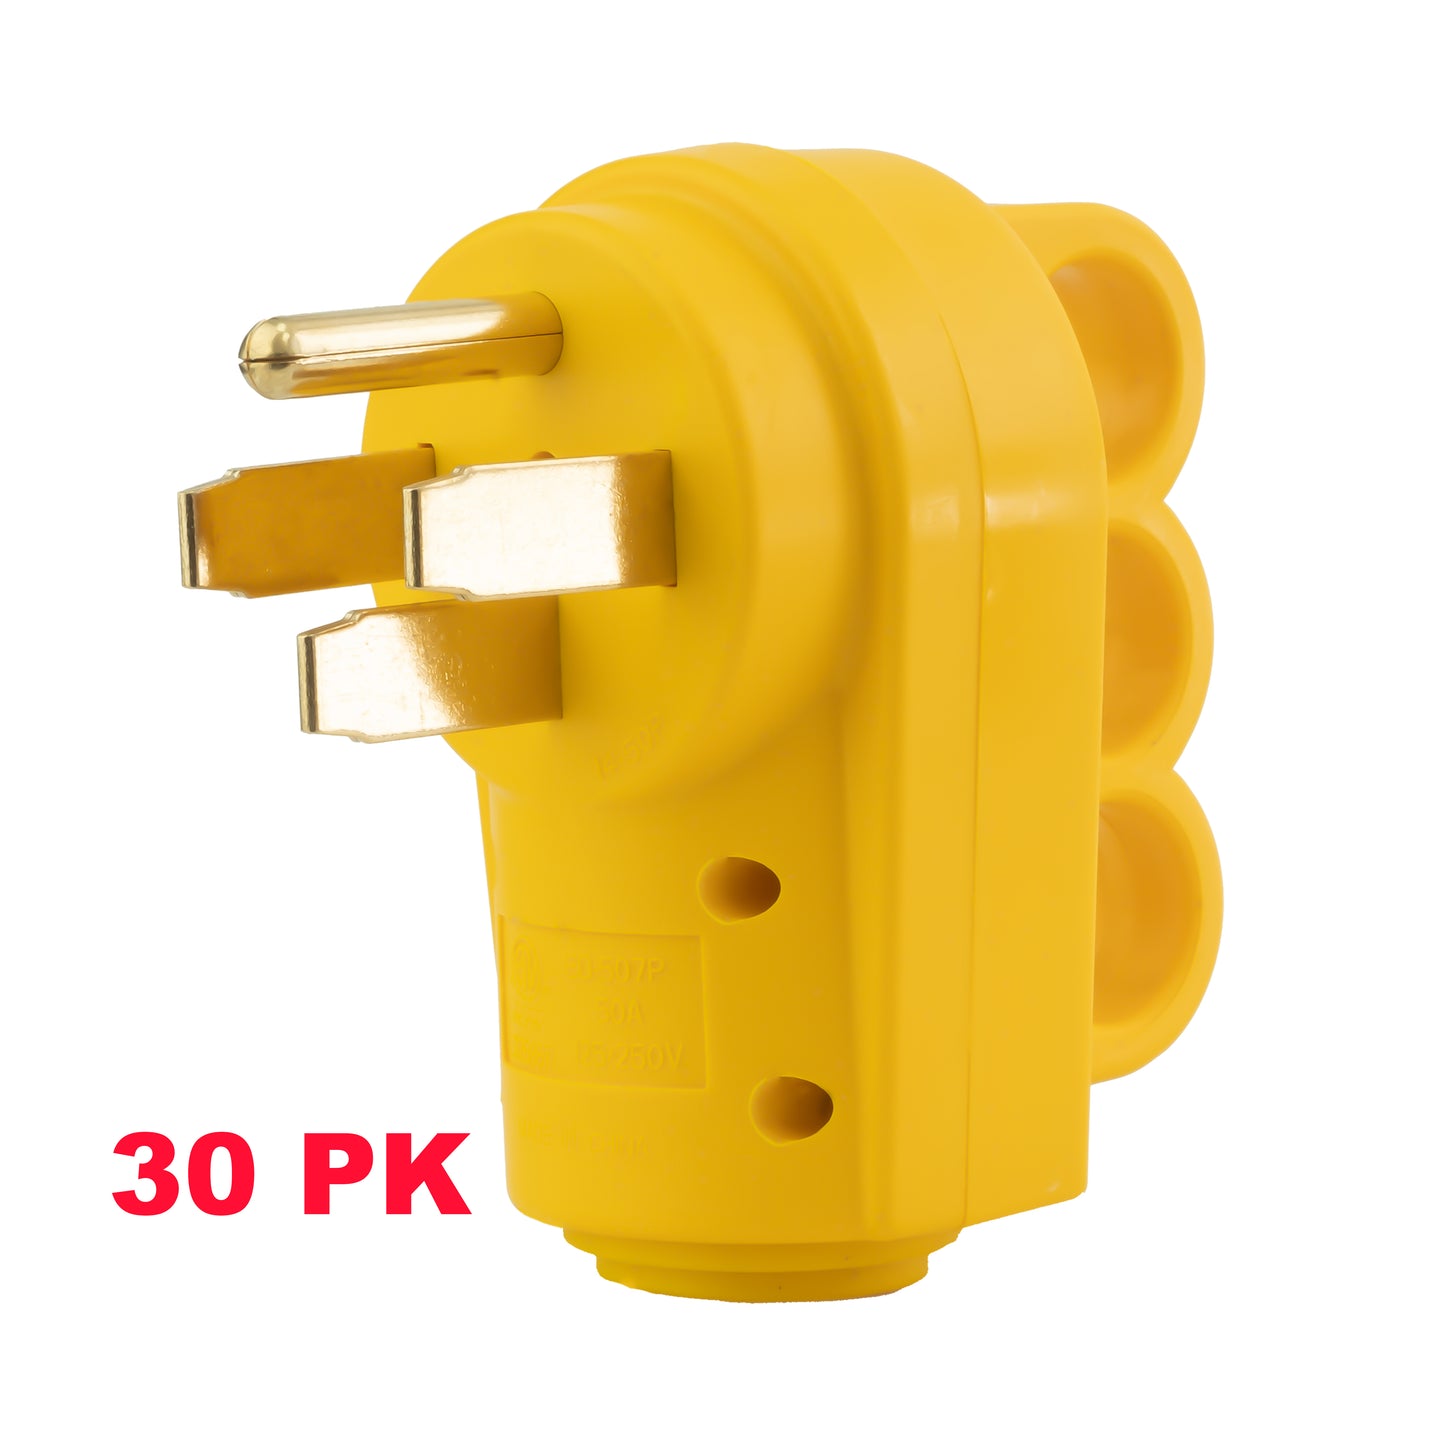 PEAKTOW Wholesale PTR0153 Heavy Duty 50Amp 125/250V RV Replacement Male Plug Receptacle Adapter with Ergonomic Handle ETL Listed 30PK